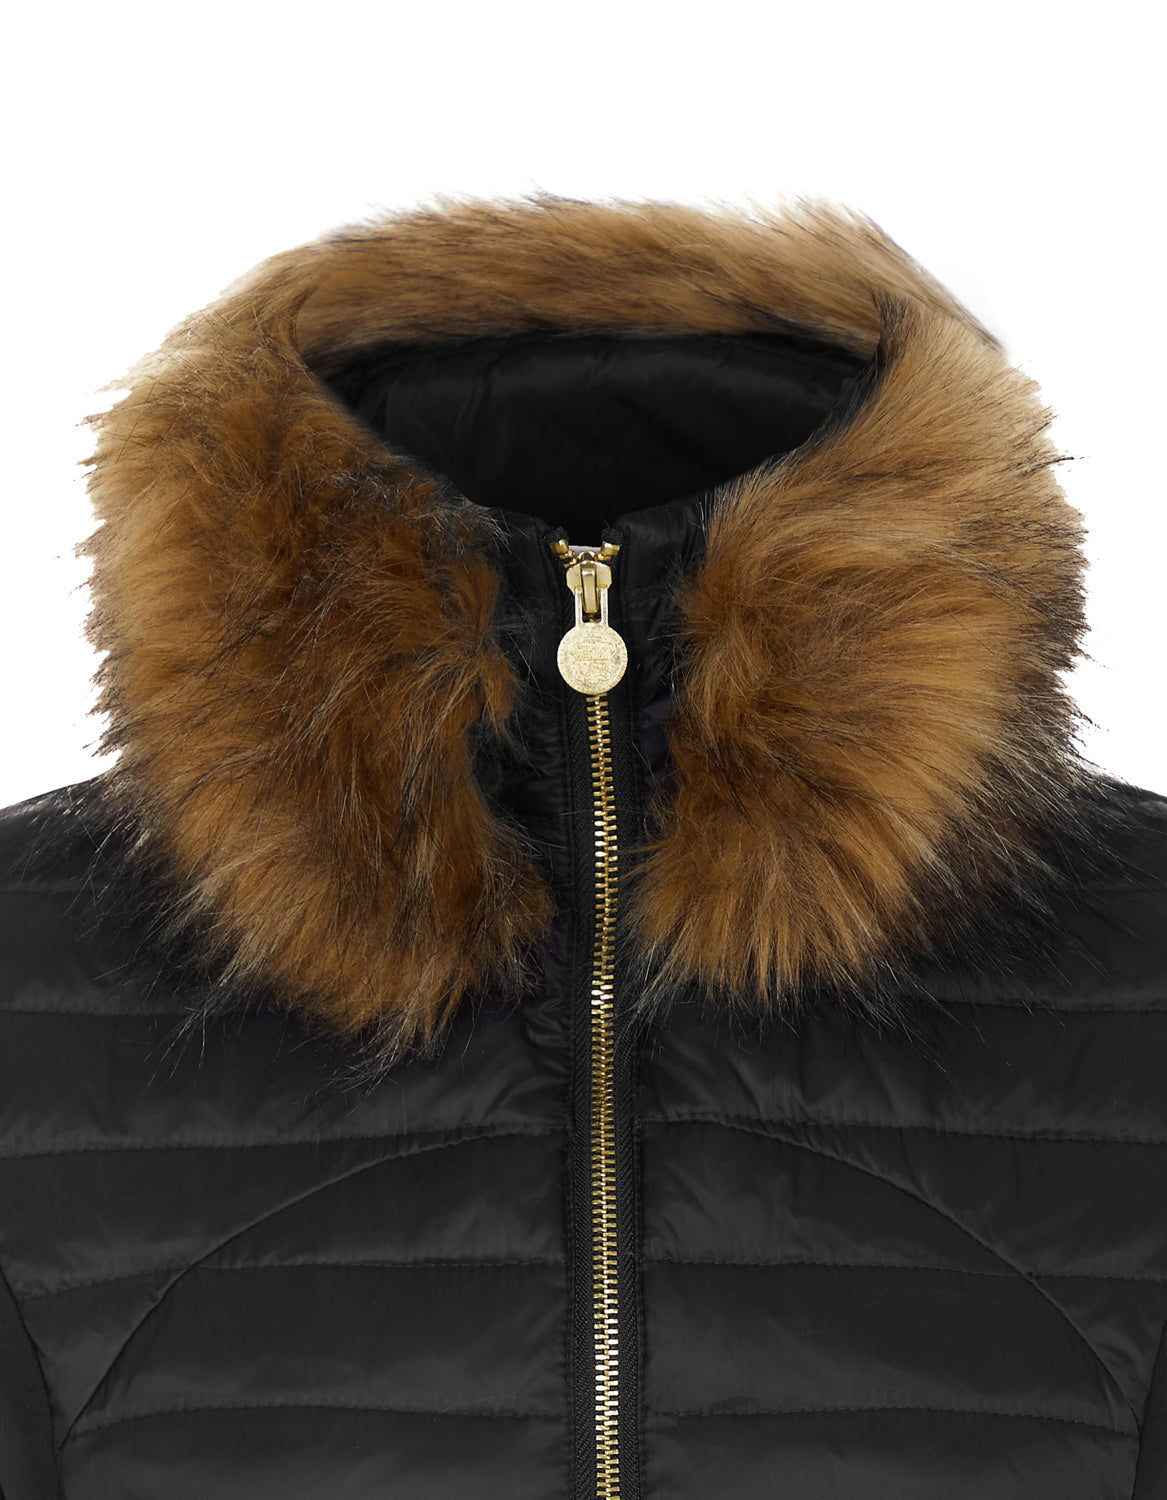 Close up detail shot of womens black puffer gilet showing the detachable faux fur collar and gold branded zip